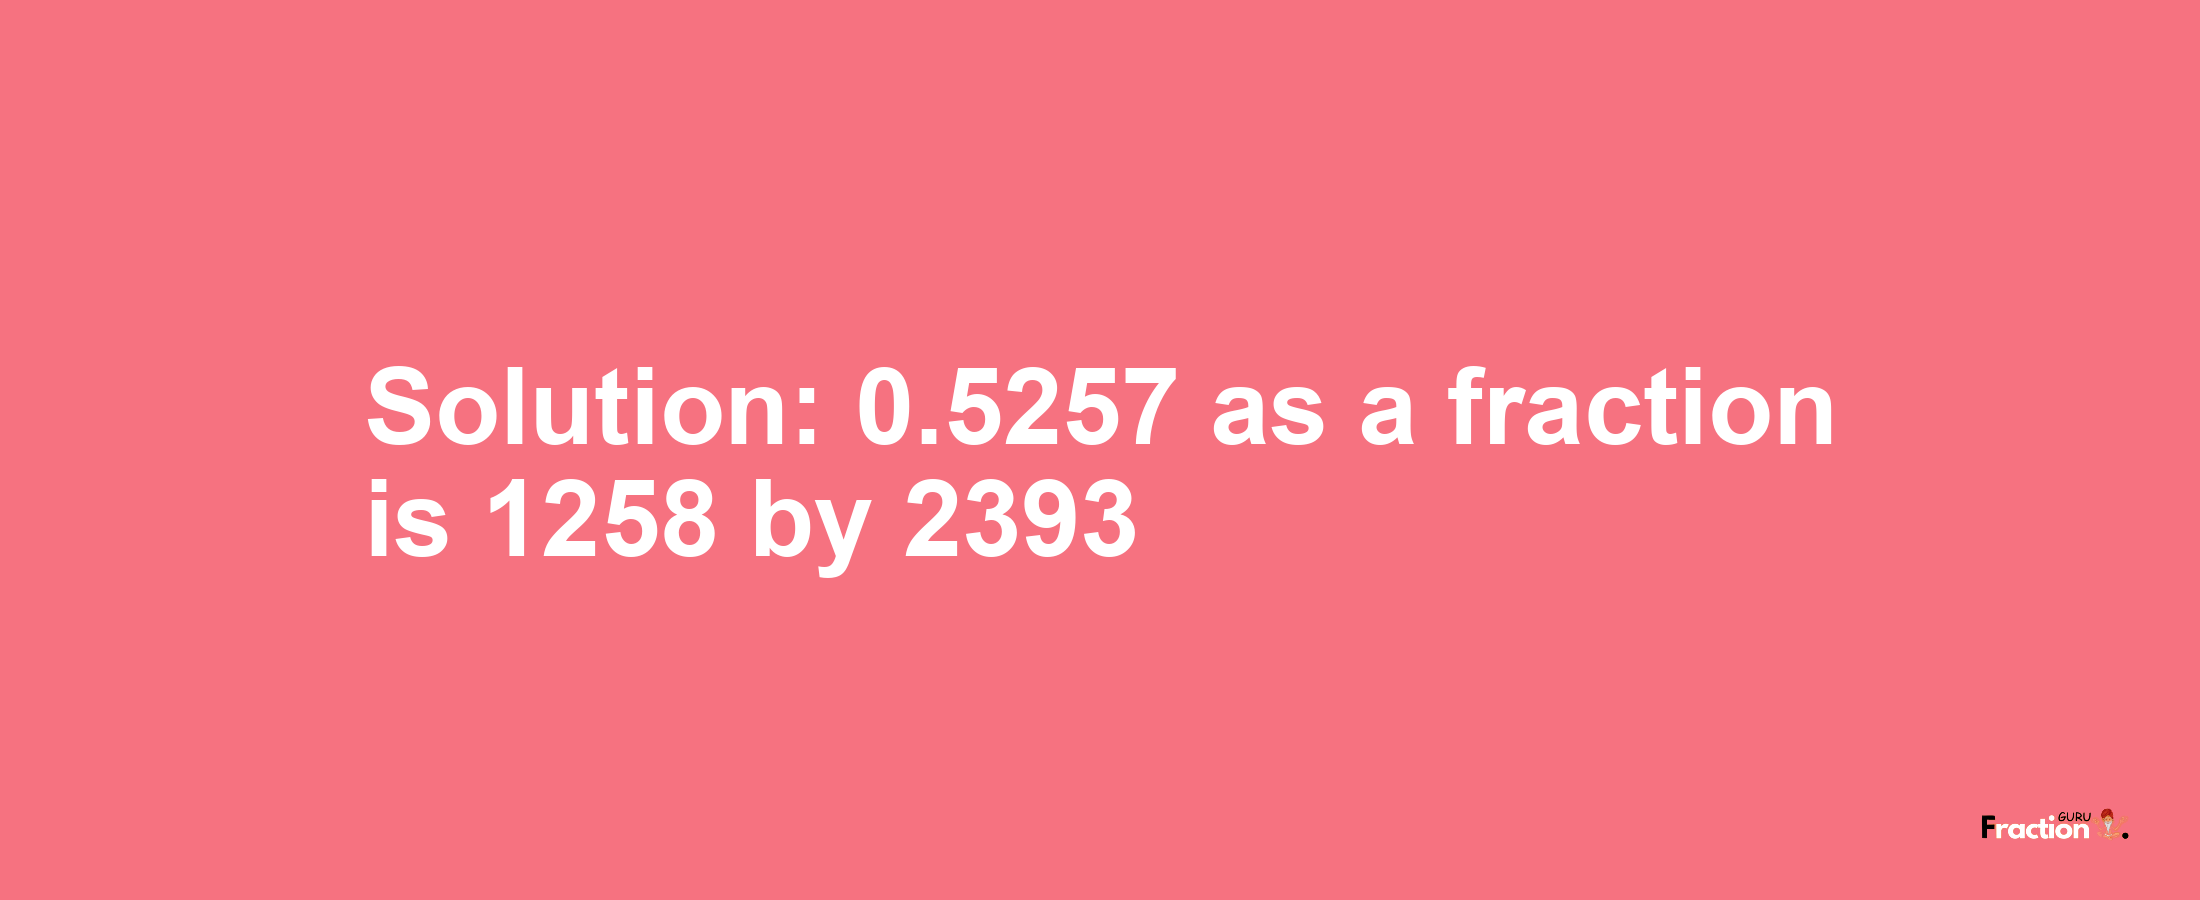 Solution:0.5257 as a fraction is 1258/2393